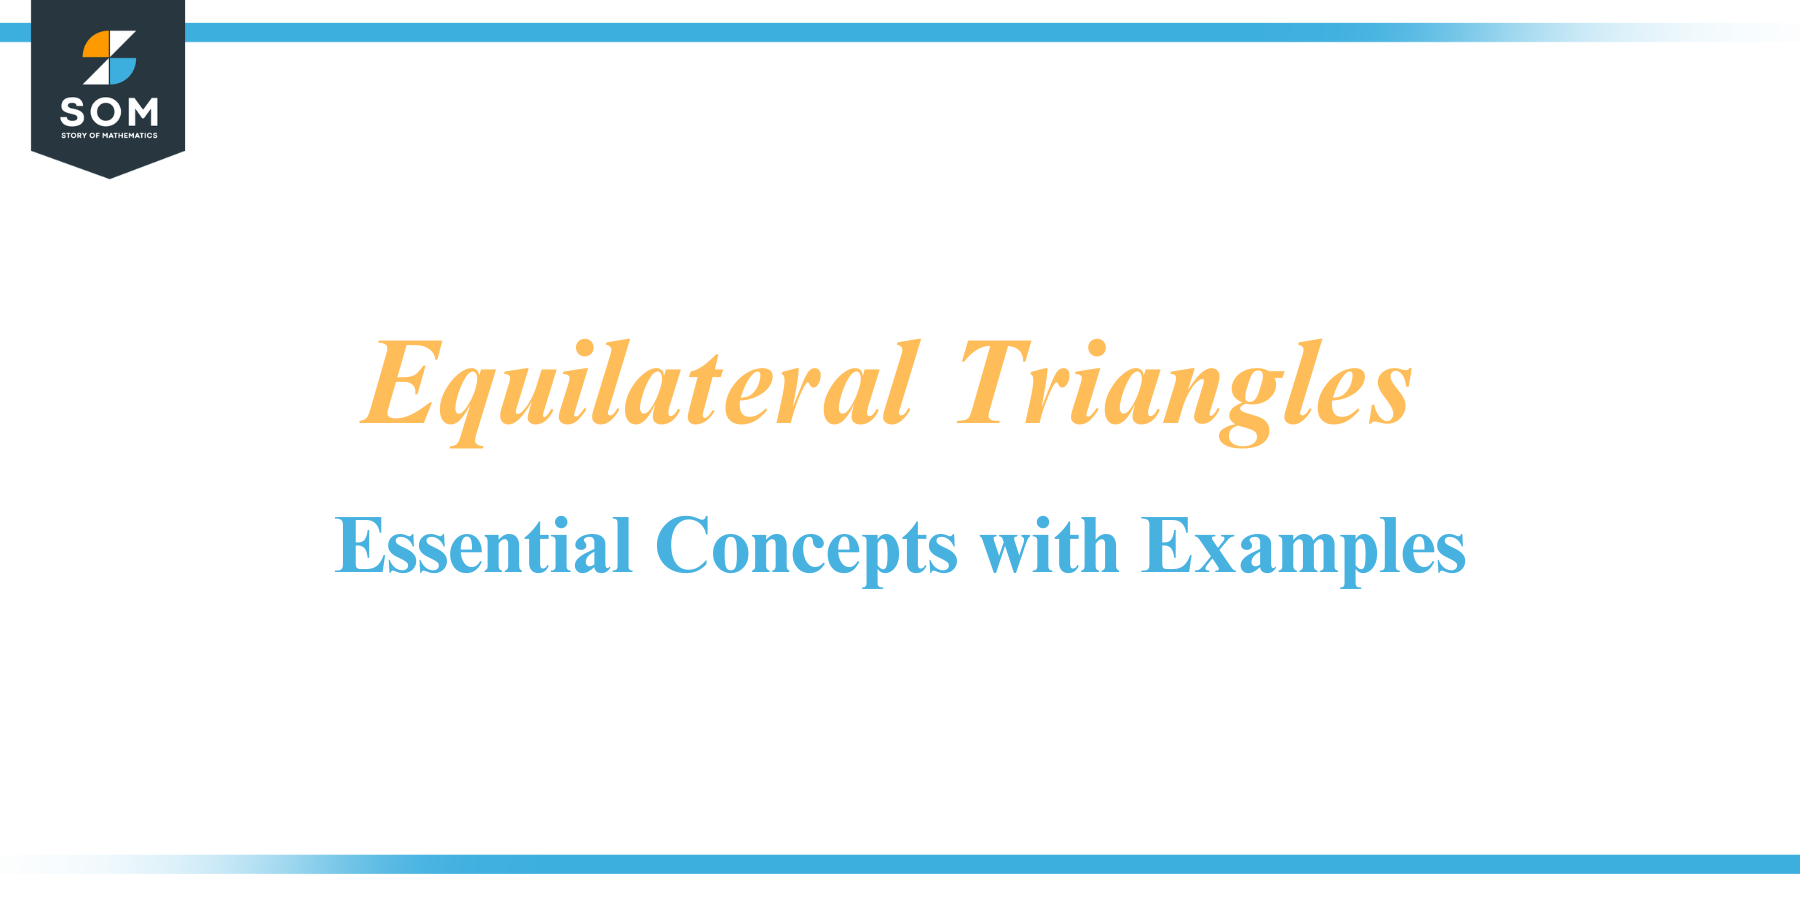 Equilateral Triangles Essential Concepts with